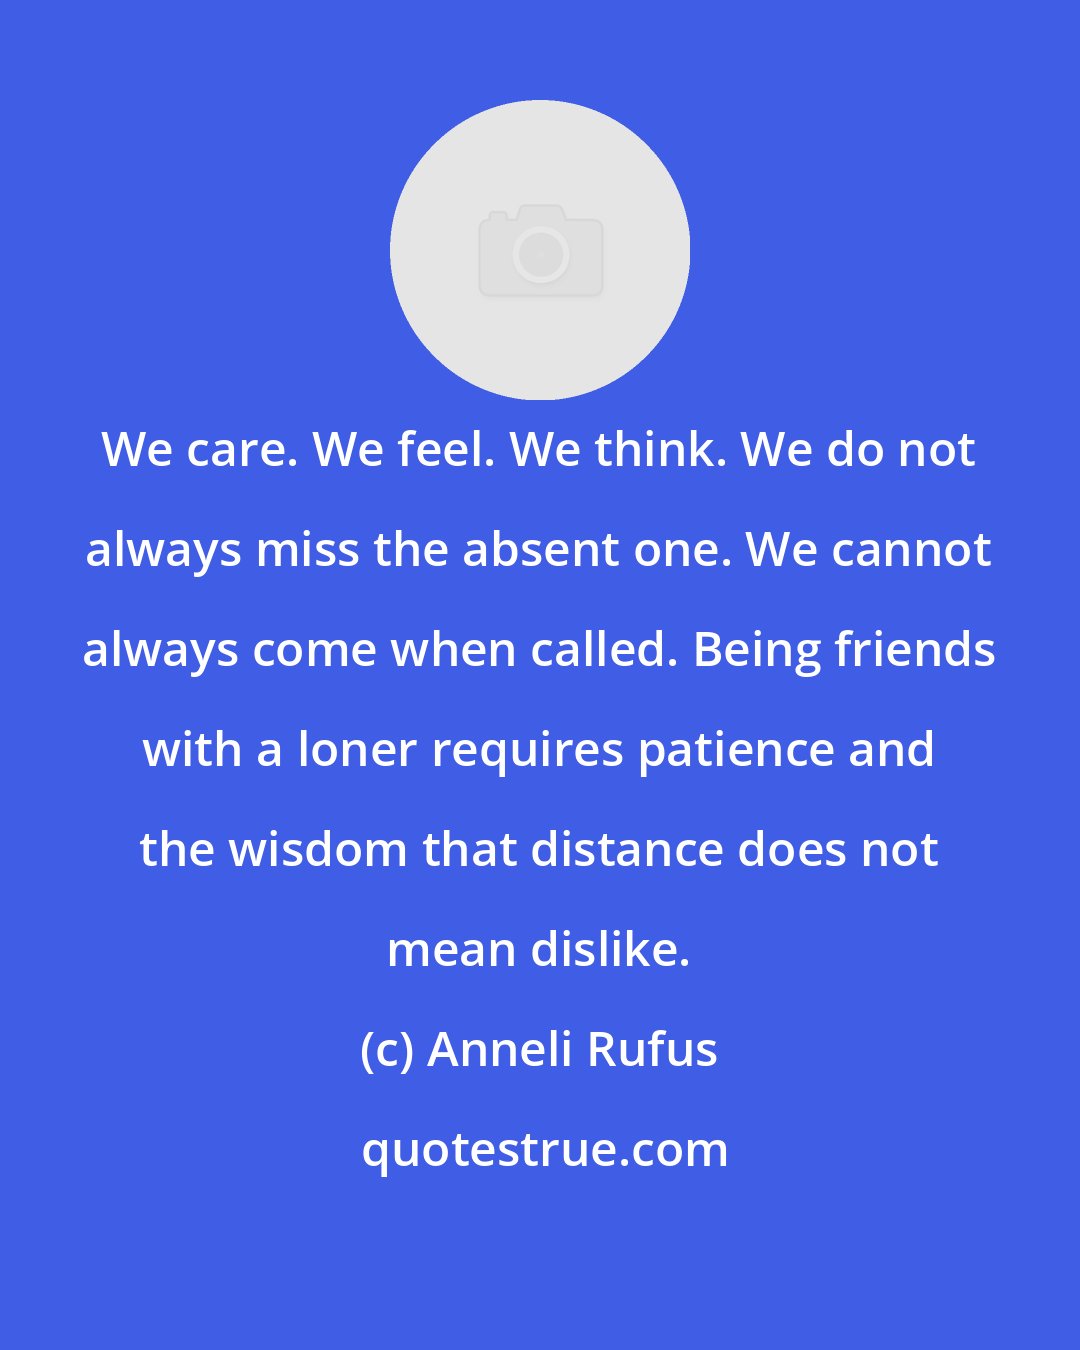 Anneli Rufus: We care. We feel. We think. We do not always miss the absent one. We cannot always come when called. Being friends with a loner requires patience and the wisdom that distance does not mean dislike.